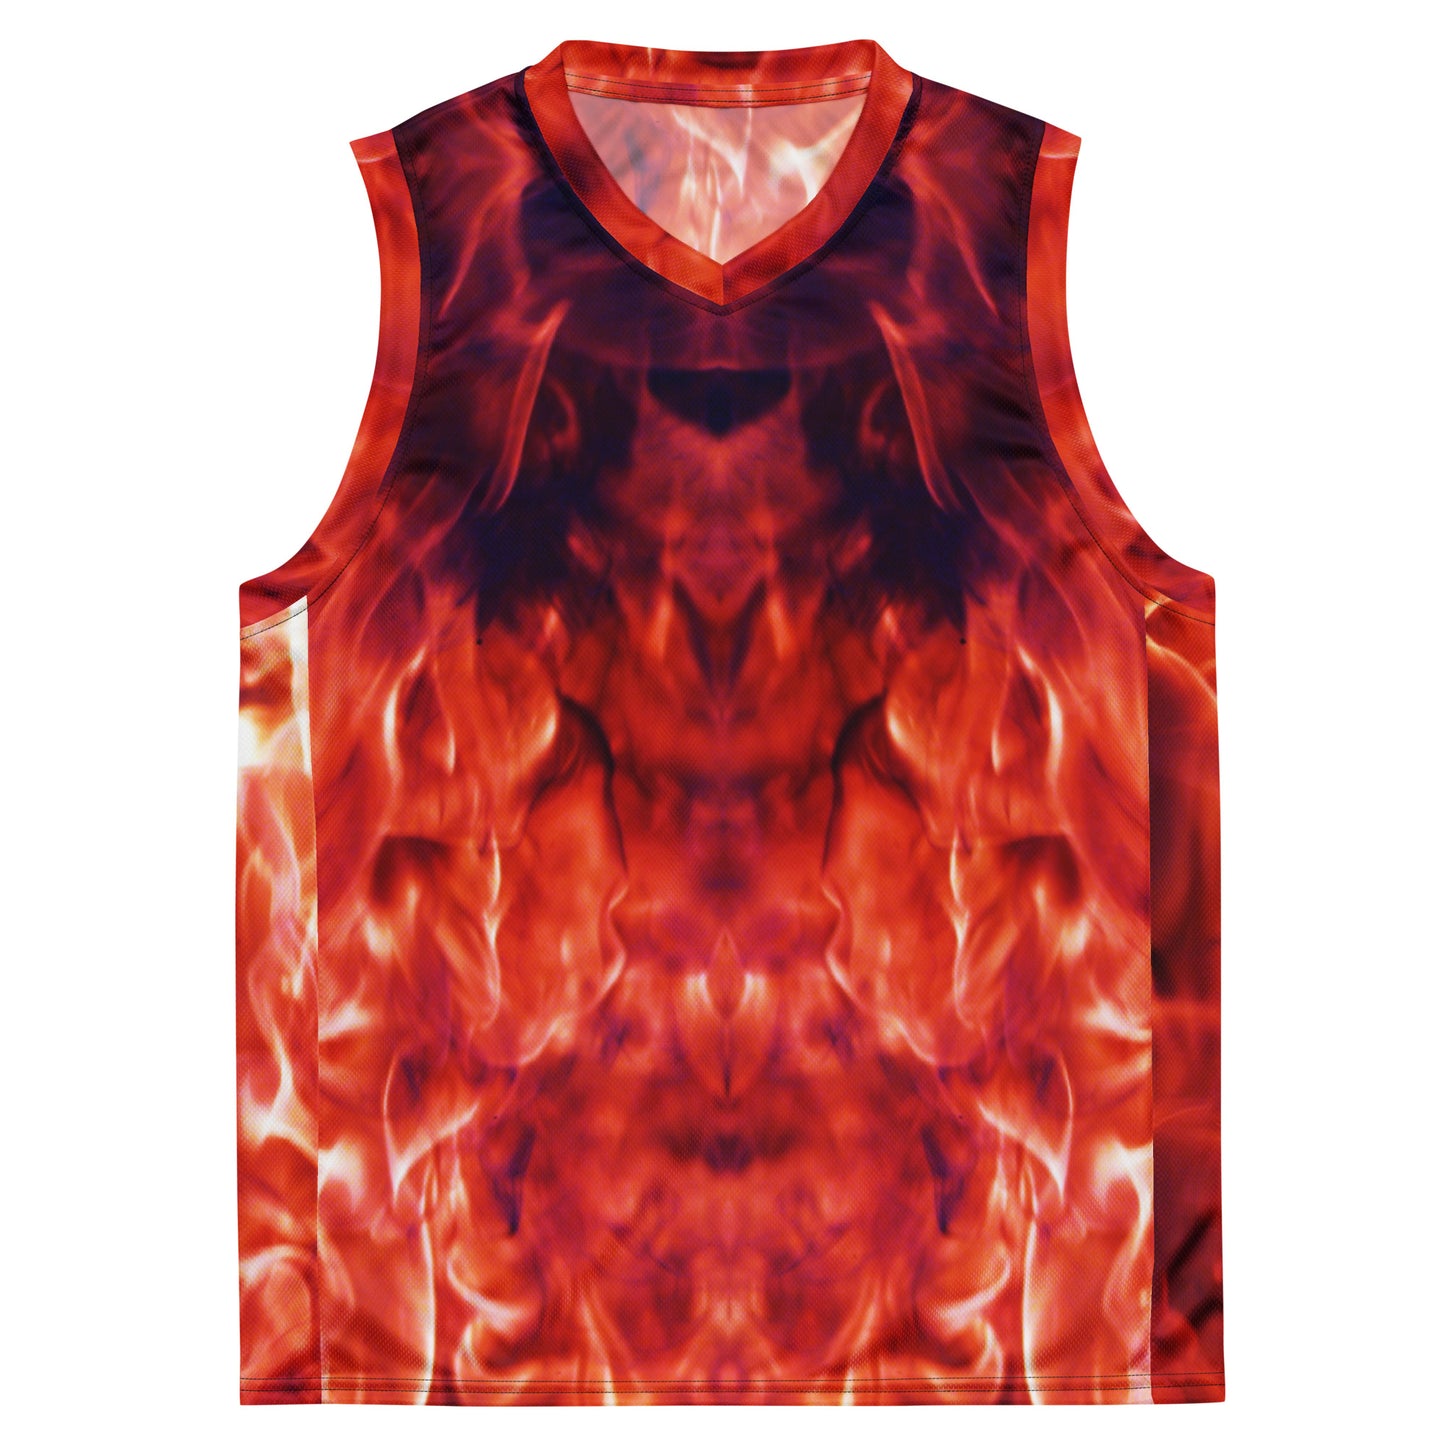 Putt Angry Recycled unisex basketball jersey